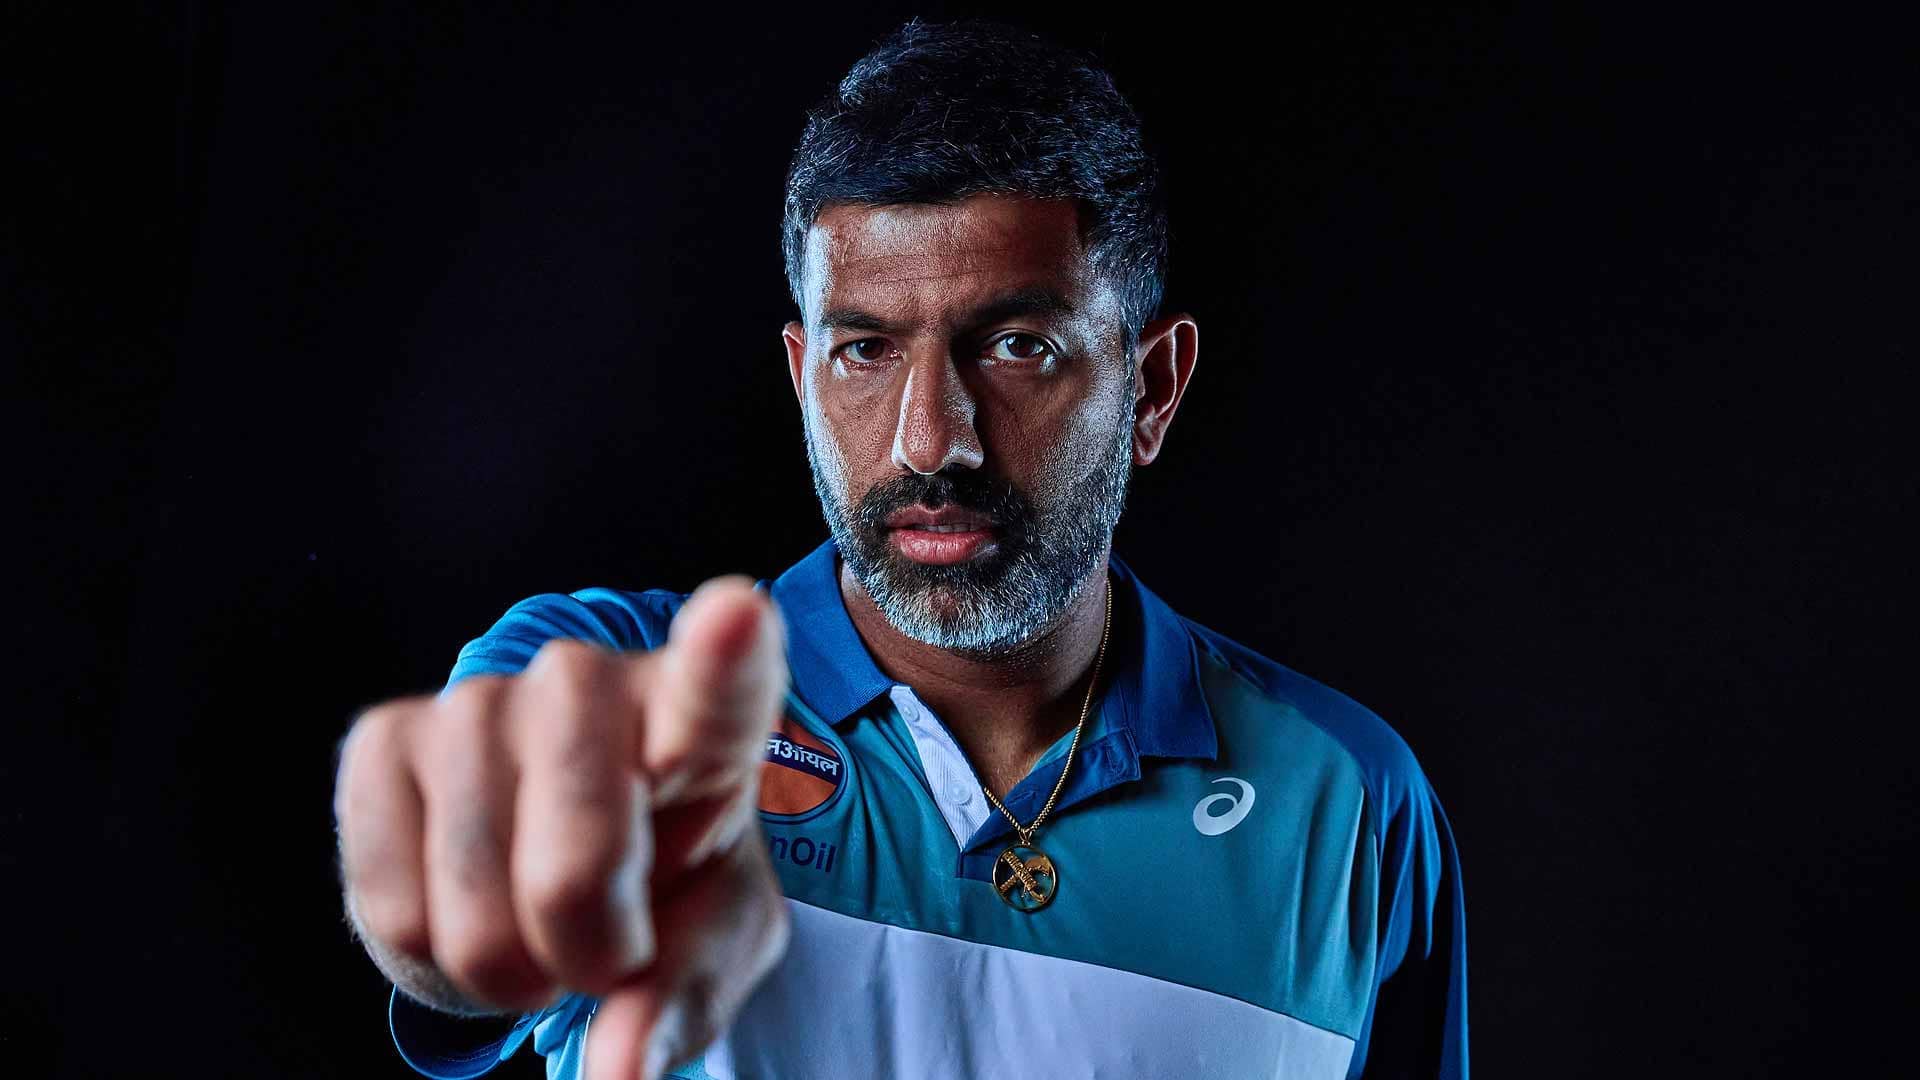 Rohan Bopanna is the oldest Grand Slam doubles finalist in the Open Era at 43.